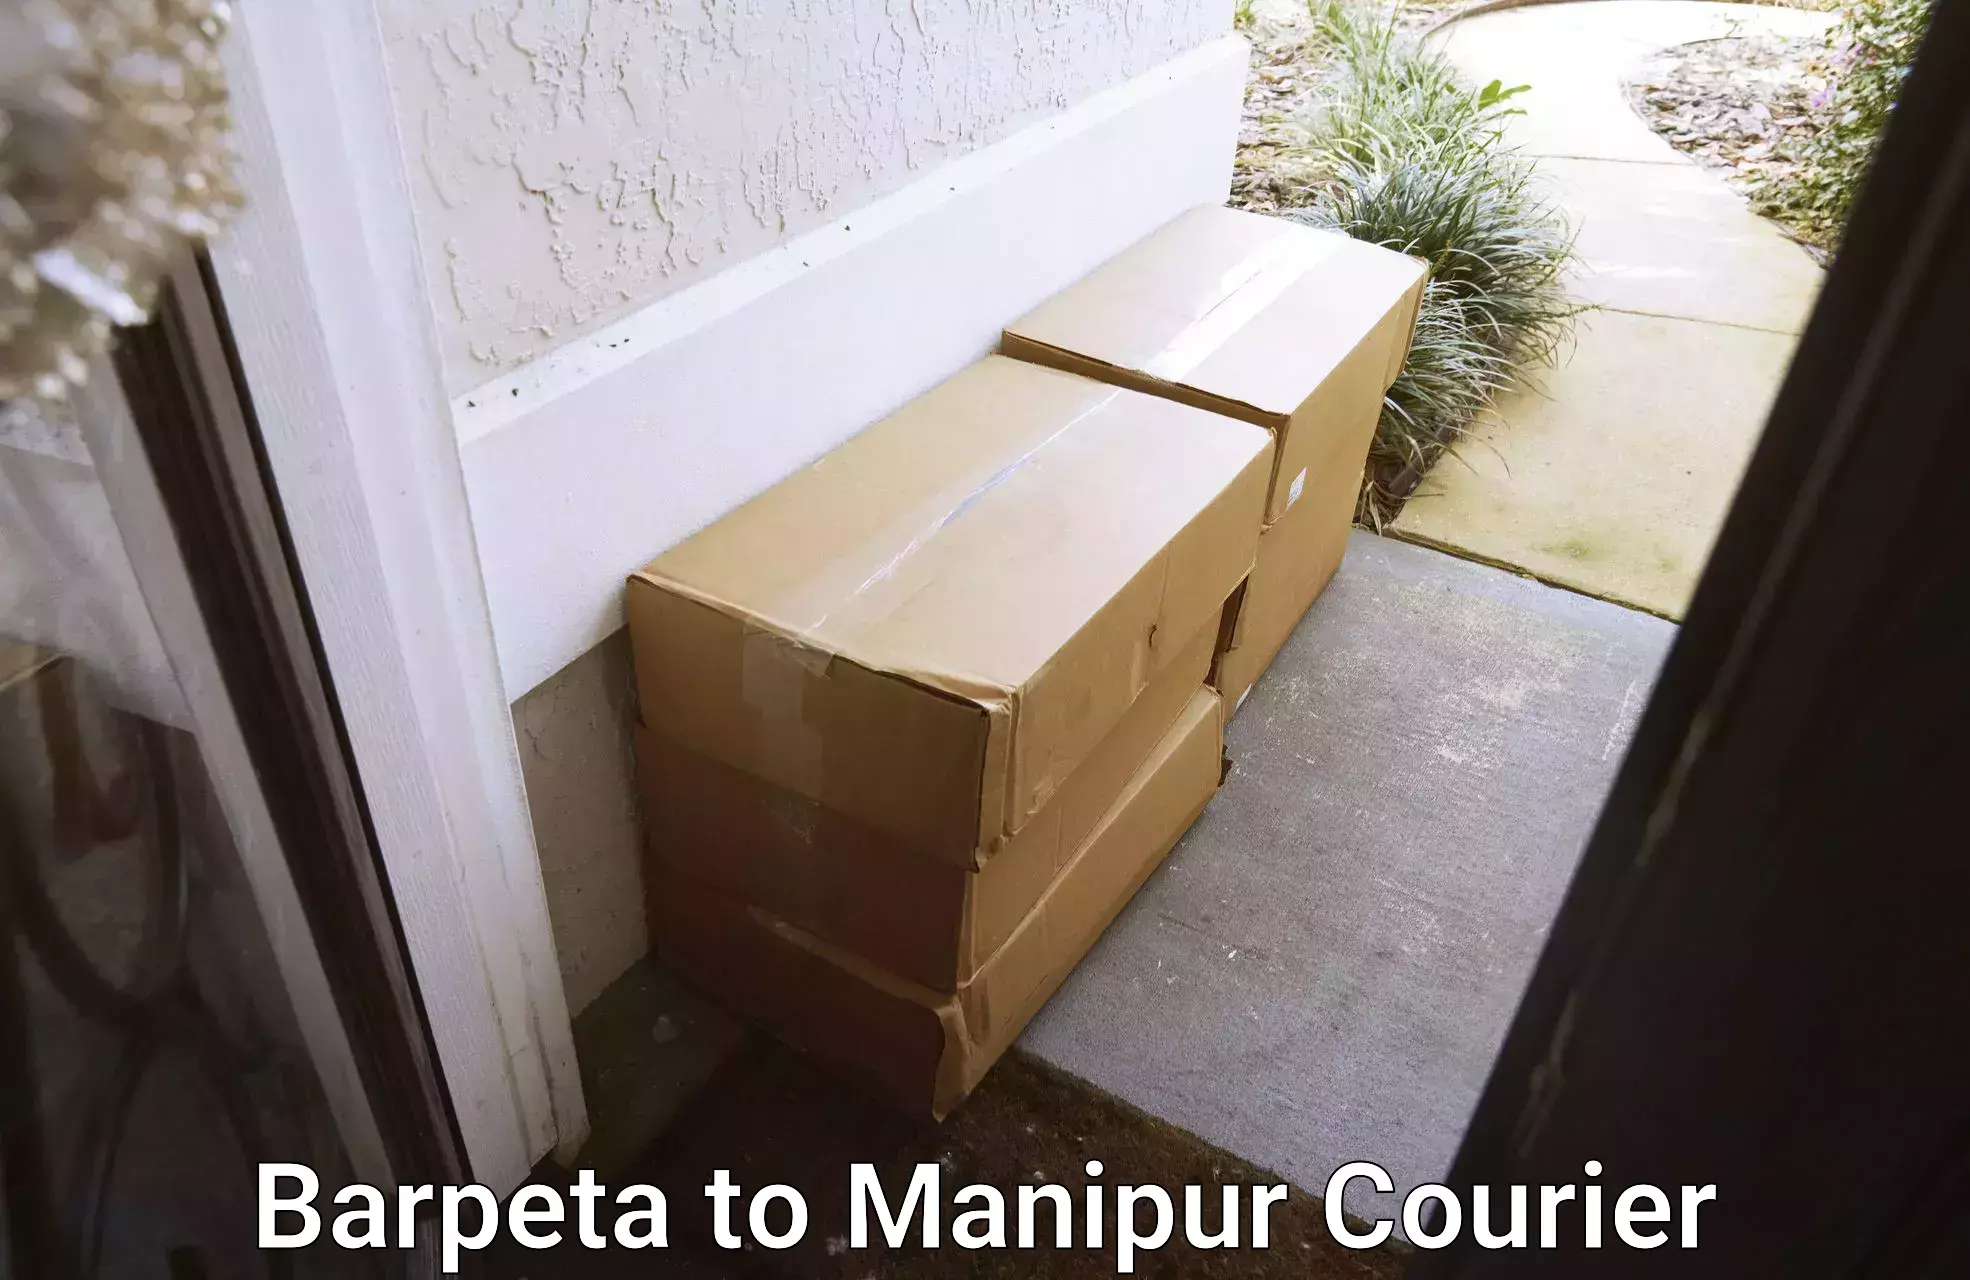 On-call courier service Barpeta to Manipur